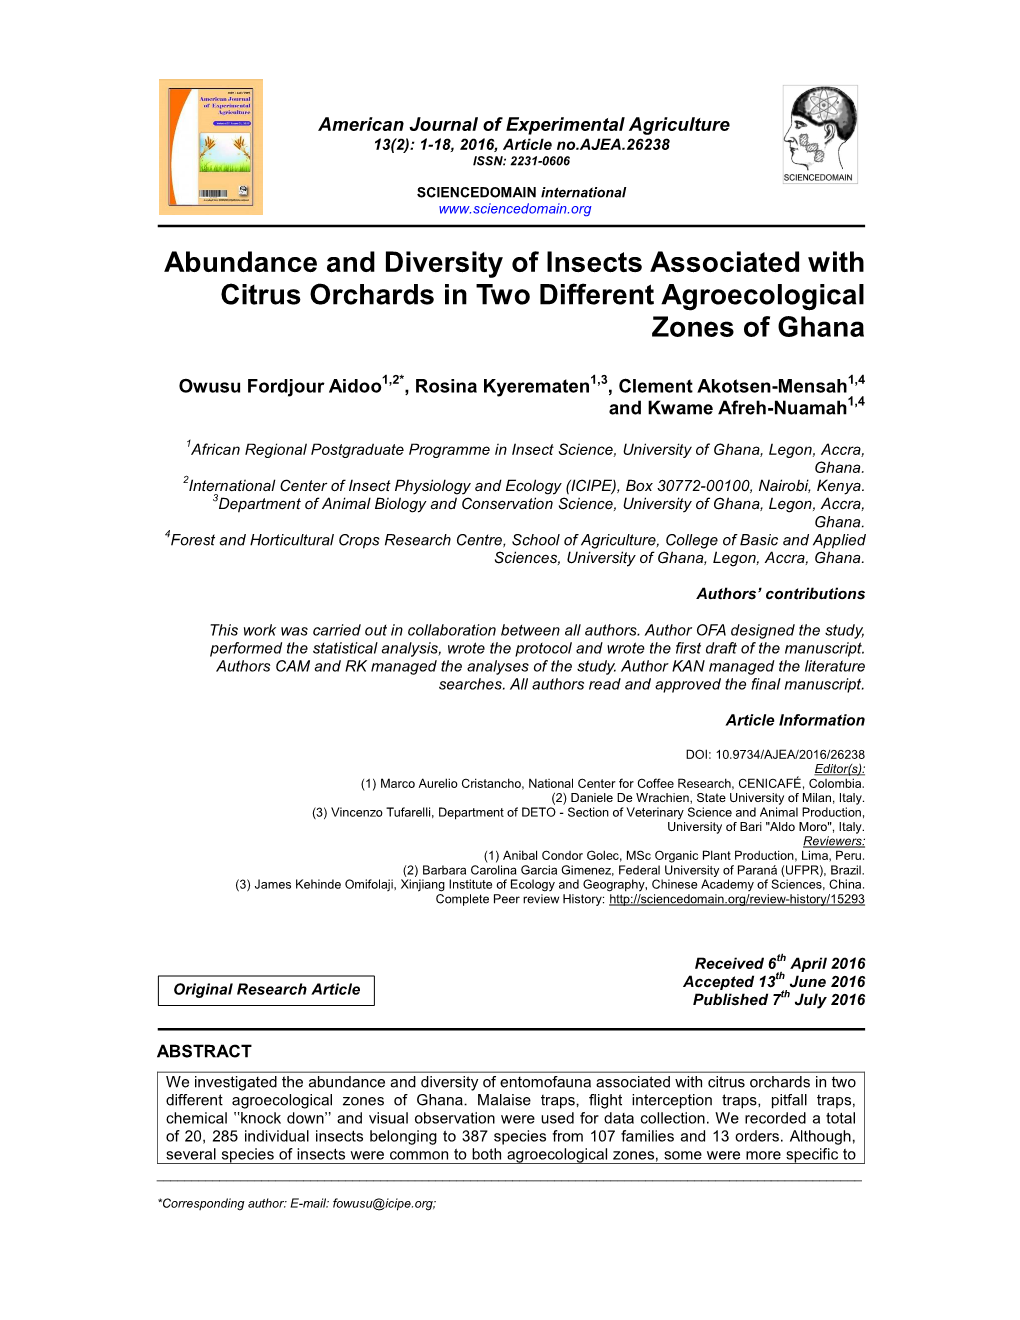 Abundance and Diversity of Insects Associated with Citrus Orchards in Two Different Agroecological Zones of Ghana